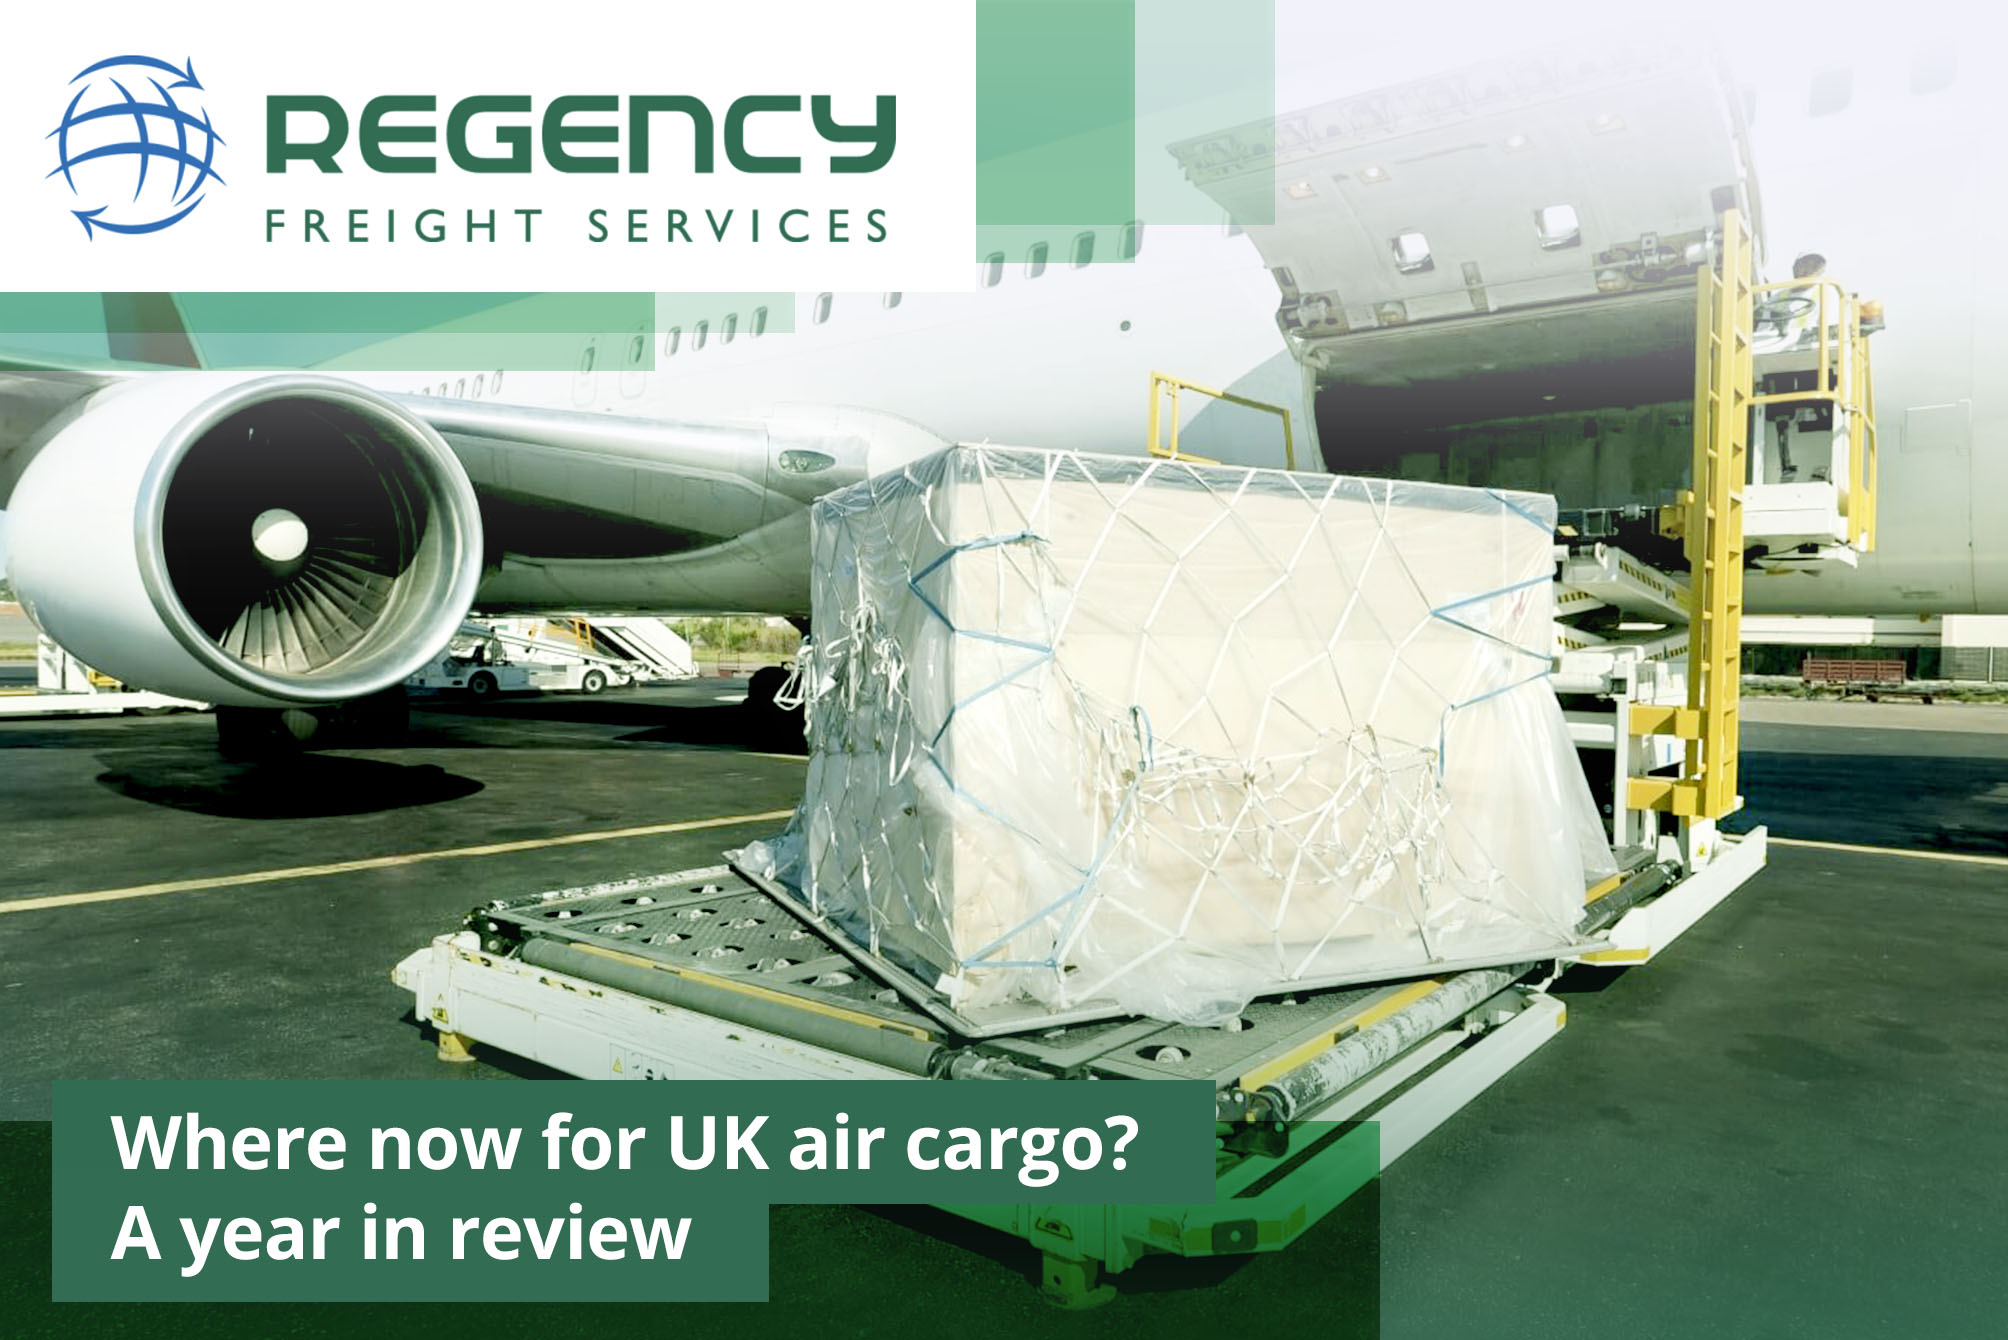 Where now for UK air cargo? A year in review